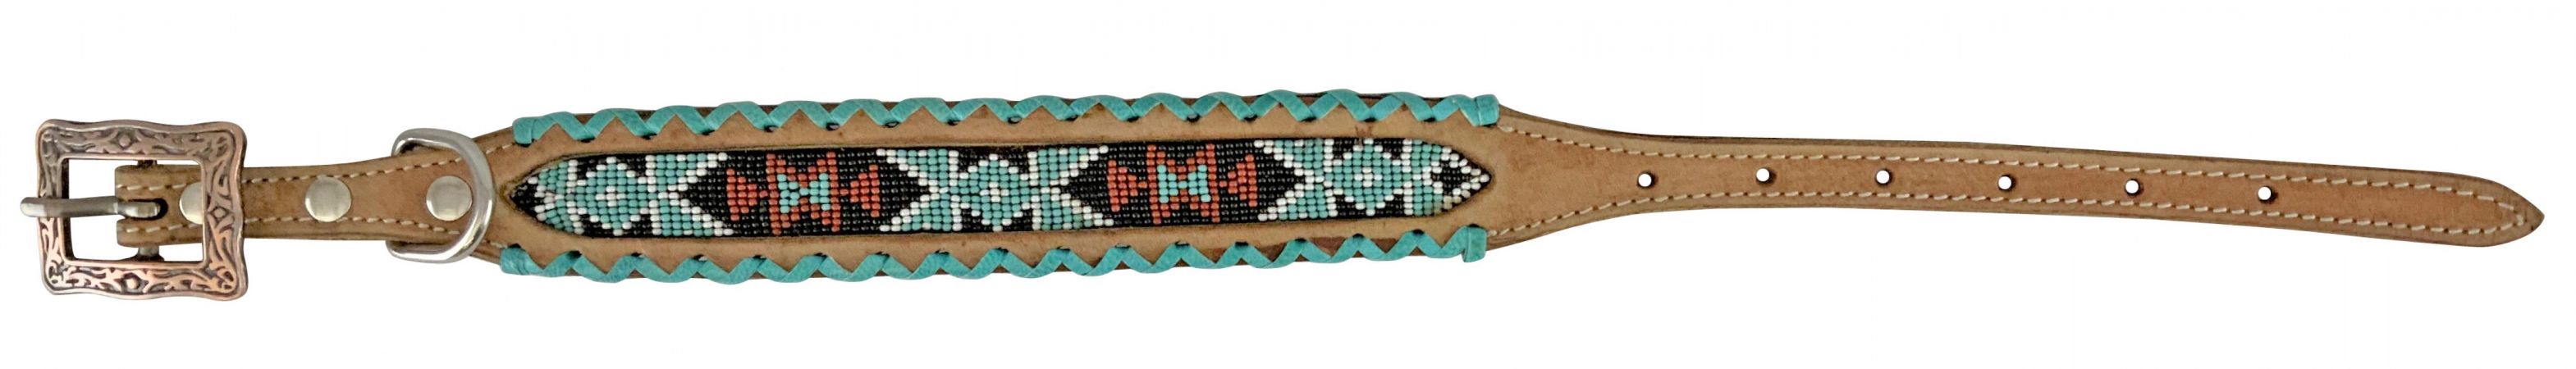 Showman Couture Genuine leather dog collar with beaded inlay - Teal whipstitching